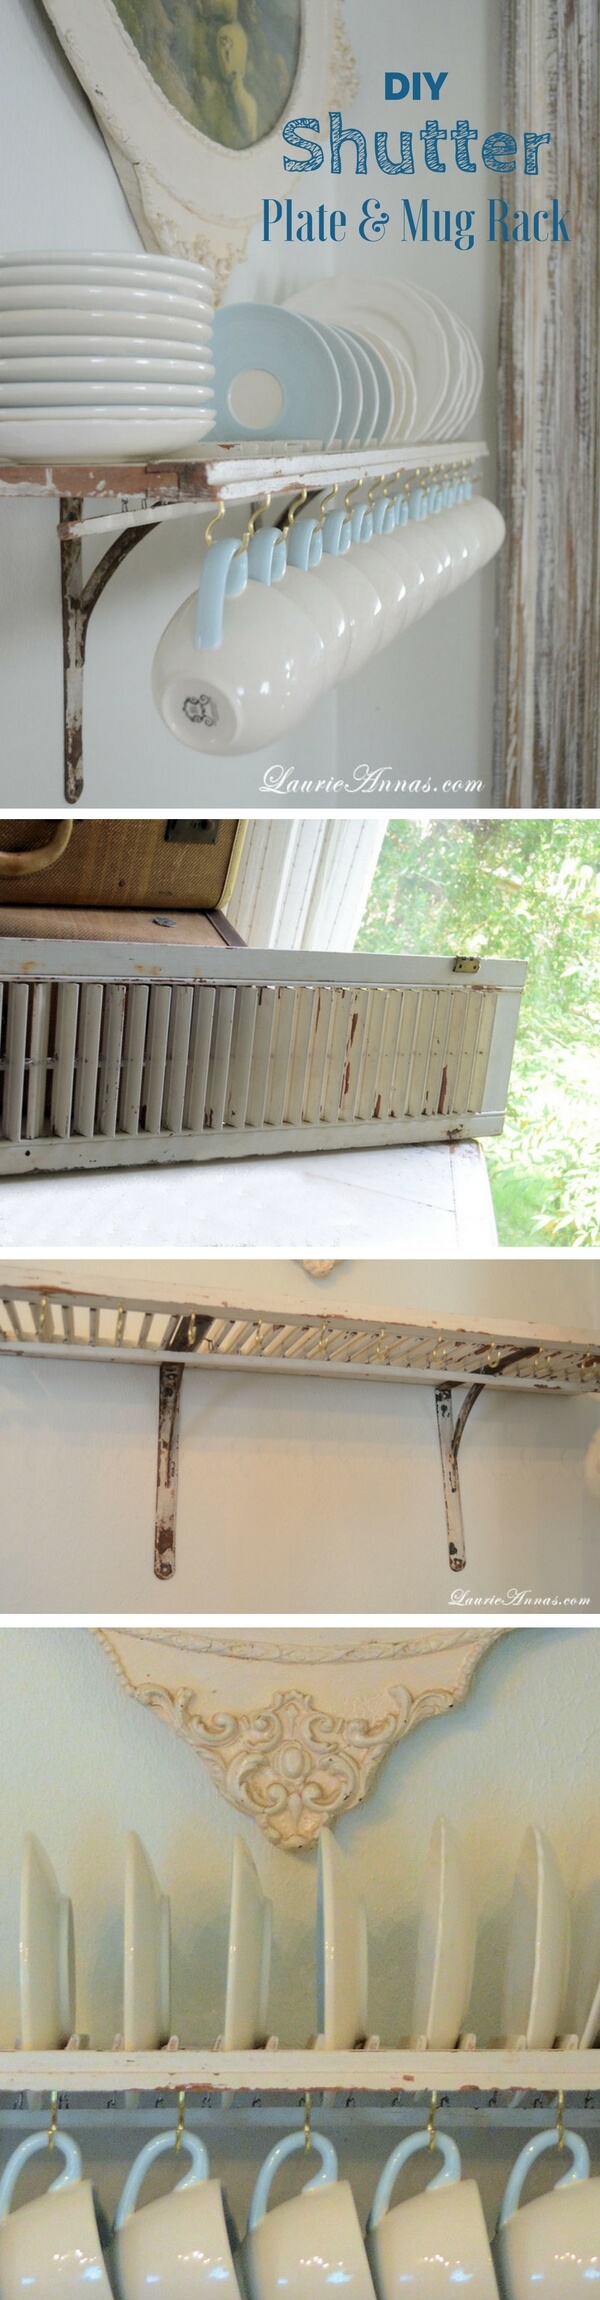 Plate and Mug Rack from a Reclaimed Shutter